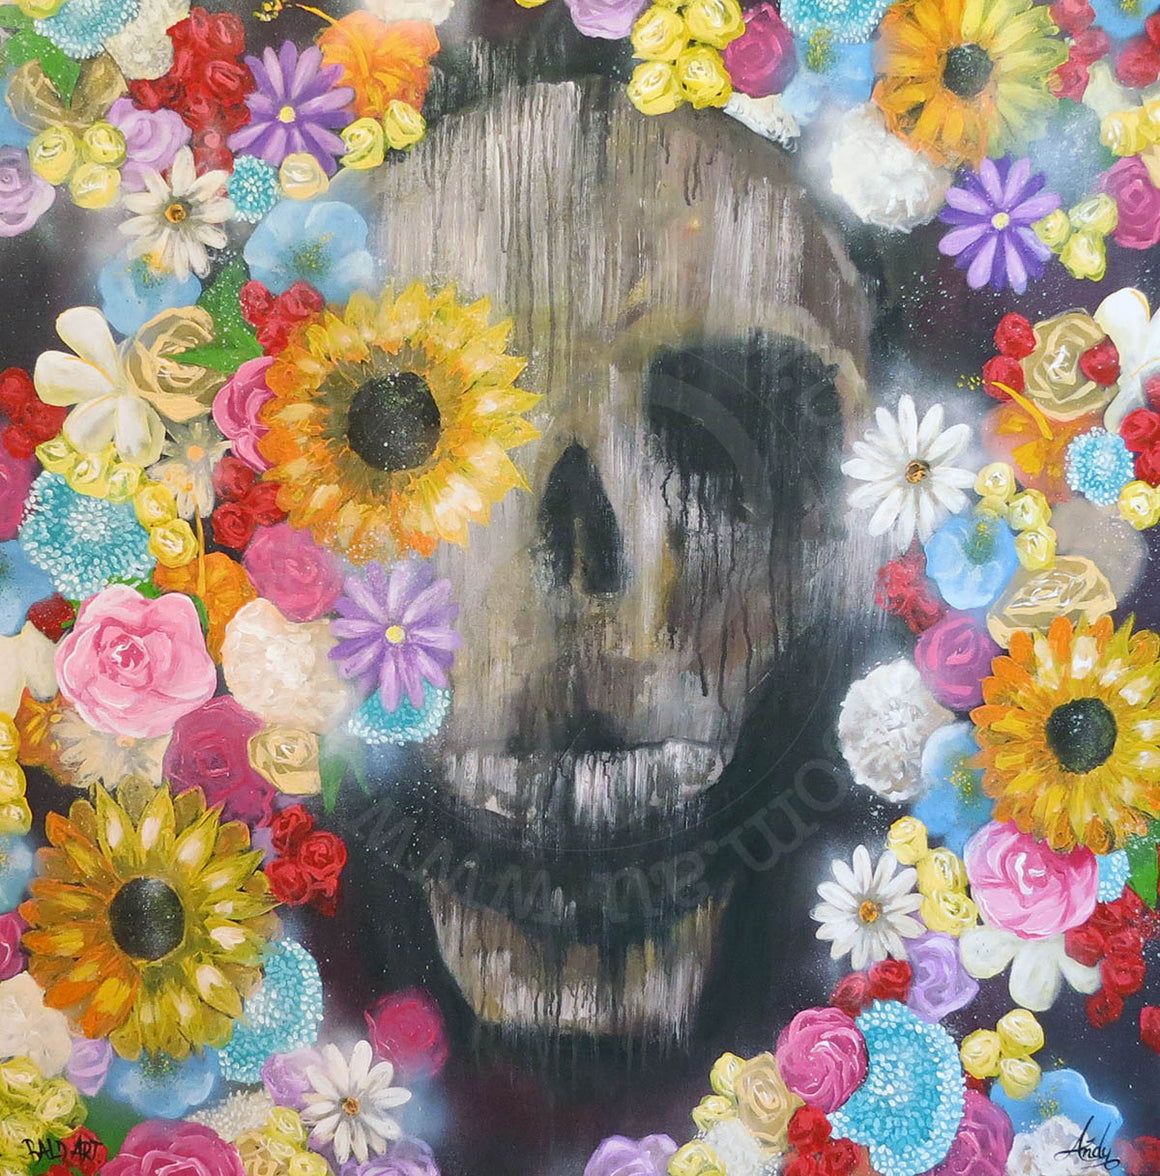 contemporary skull art with flowers by andy baker of bald art